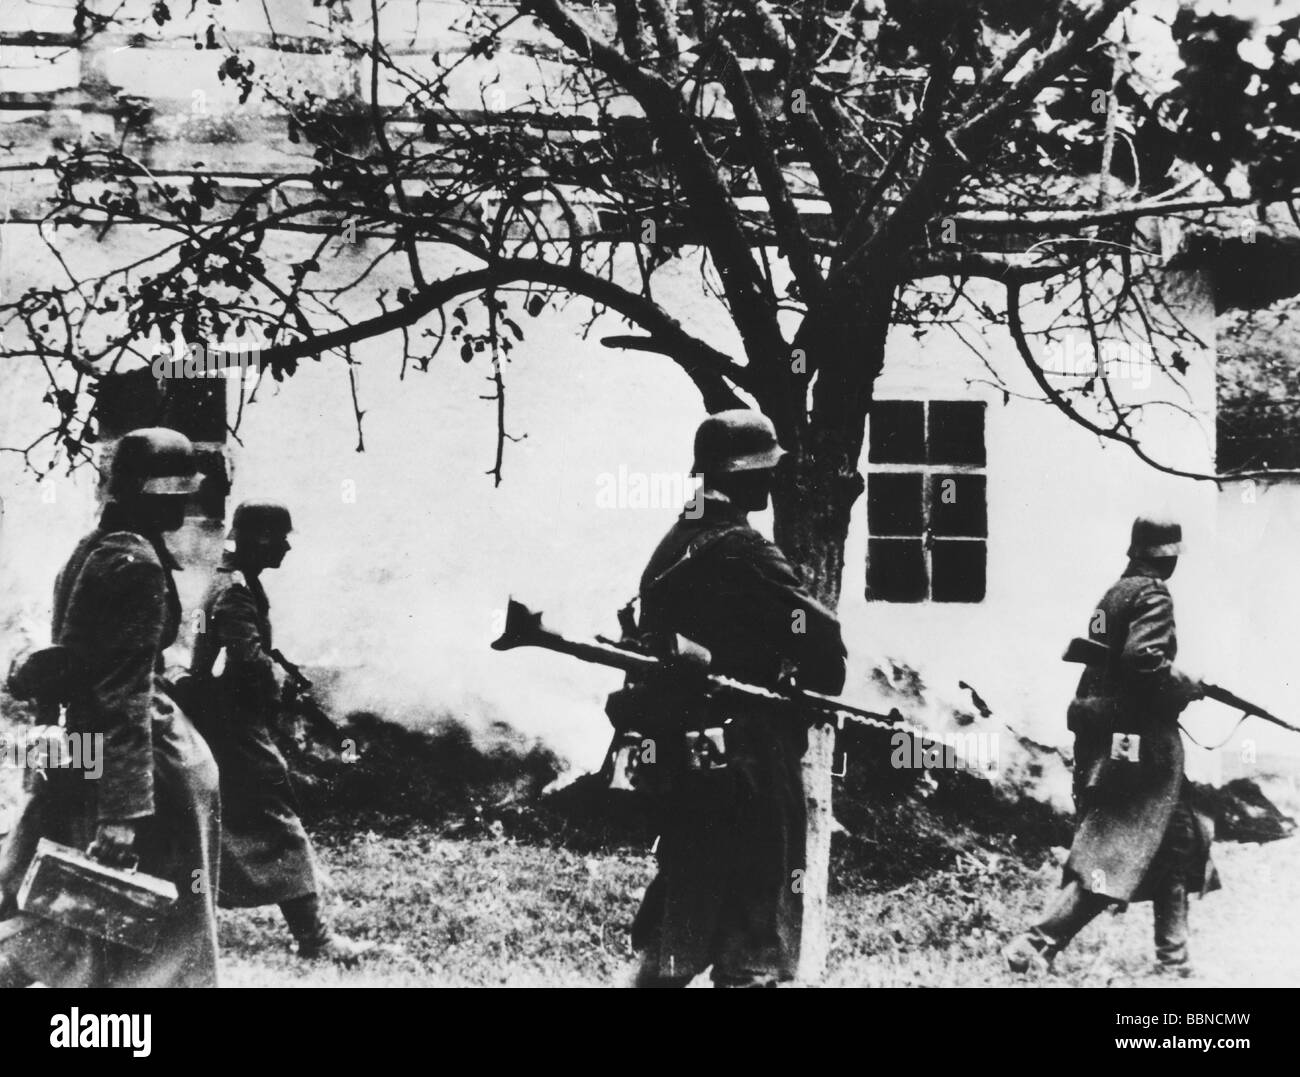 events, Second World War / WWII, Russia 1941, Battle of Kiev, 23.8. - 26.9.1941, German infantry in a village near Kiev, searching for dispersed Soviet soldiers and partisans, Stock Photo